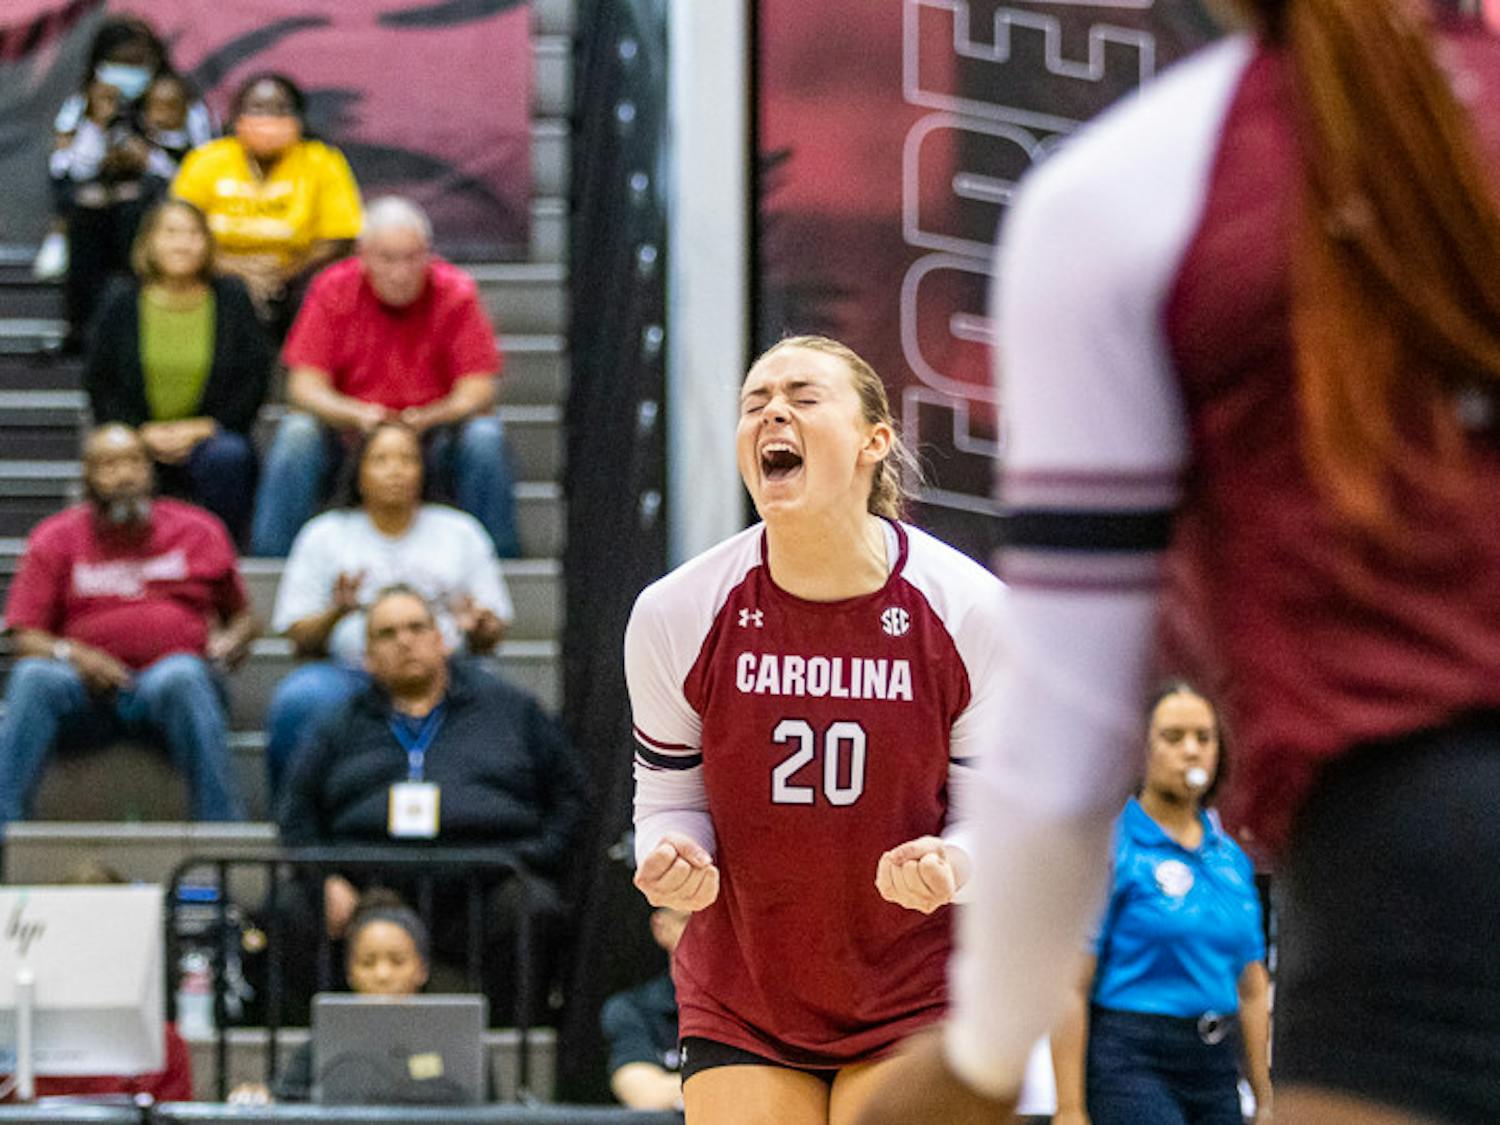 Junior outside hitter Riley Whitesides celebrates after winning a rally on Nov. 6, 2022. The Gamecocks defeated Ole Miss 3-1.&nbsp;